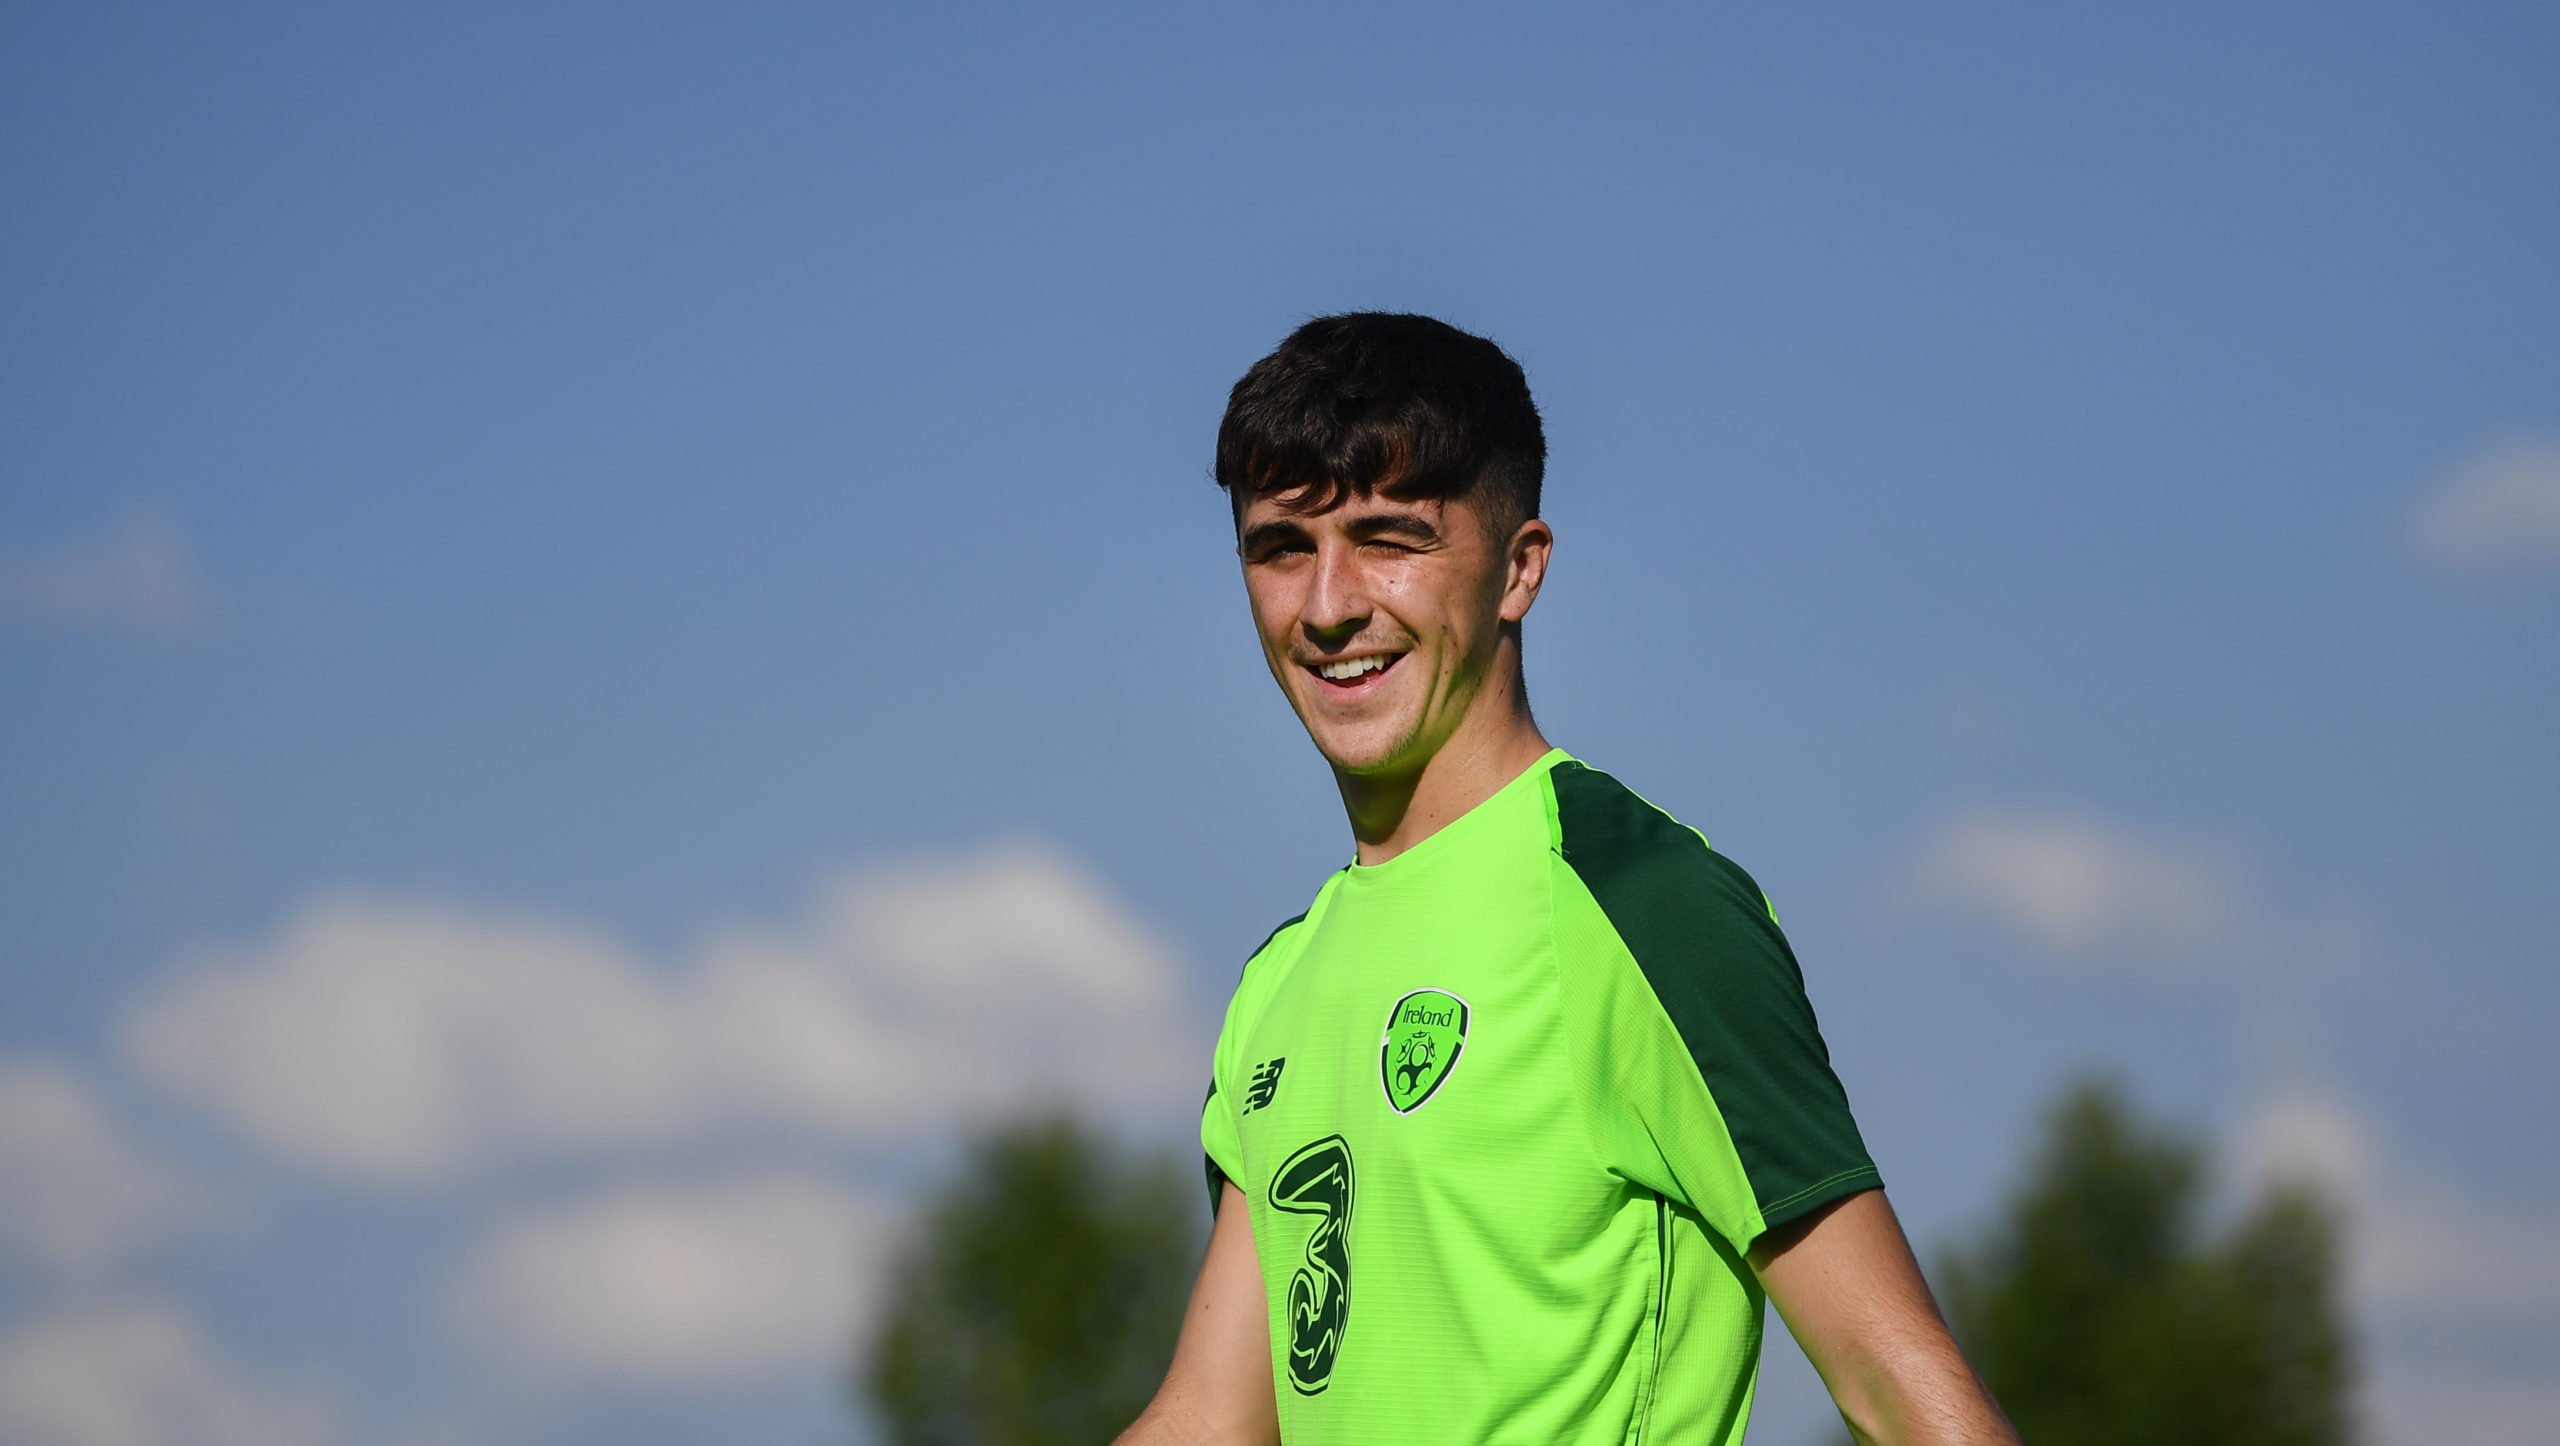 Celtic youngster Barry Coffey joins Colin Healy's Cork City on loan